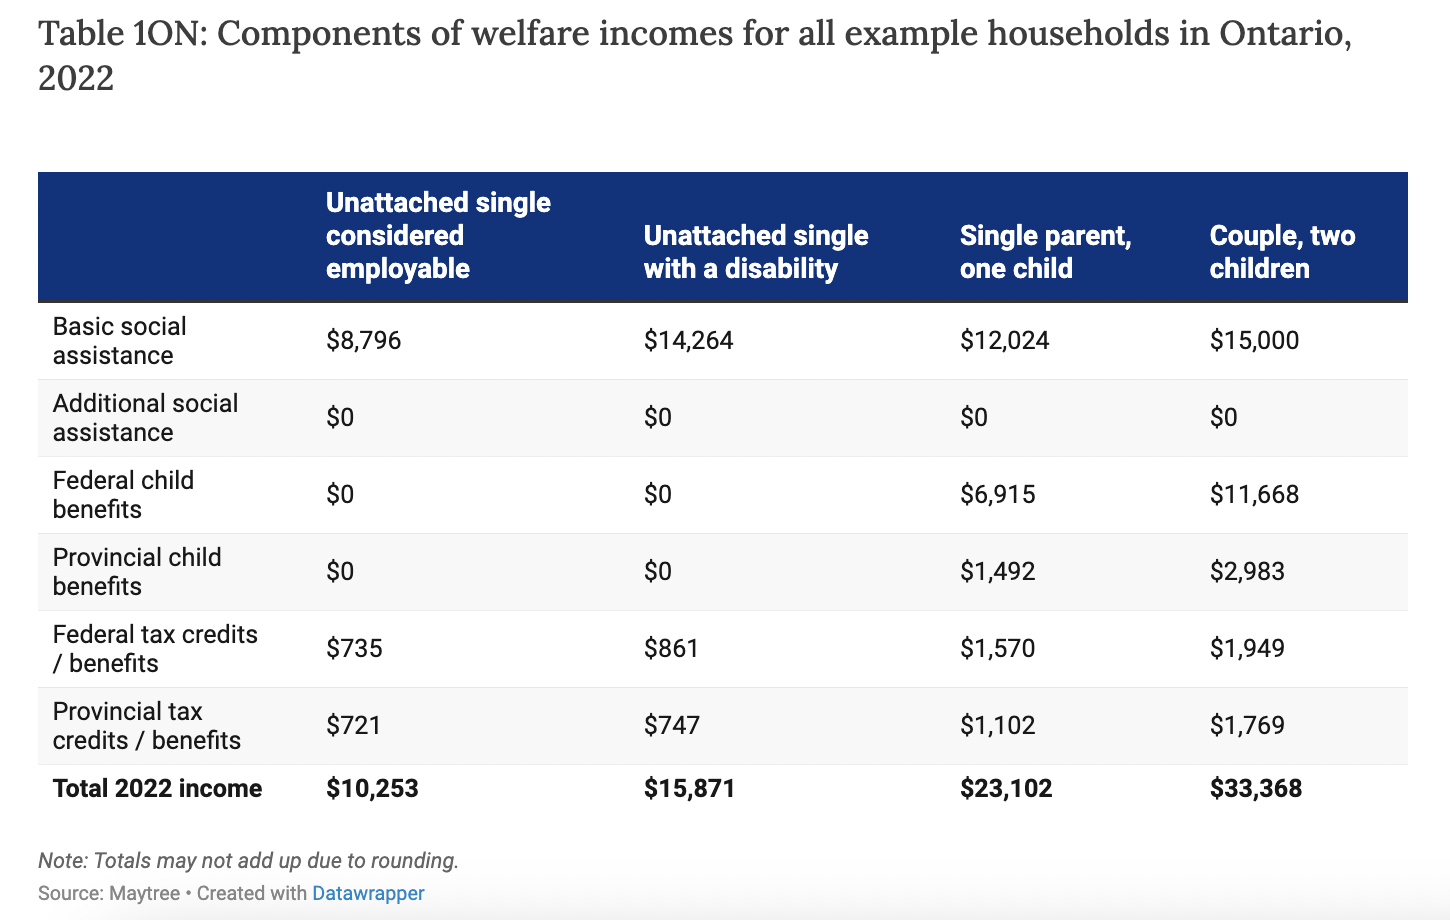 table 10N: Components of welfare incomes for all example households in Ontario, 2022: Total 2022 for unattached single: $10,253; unattached single with a disability: $15,871; single parent, one child: $23,102; and couple, two children: $33,368